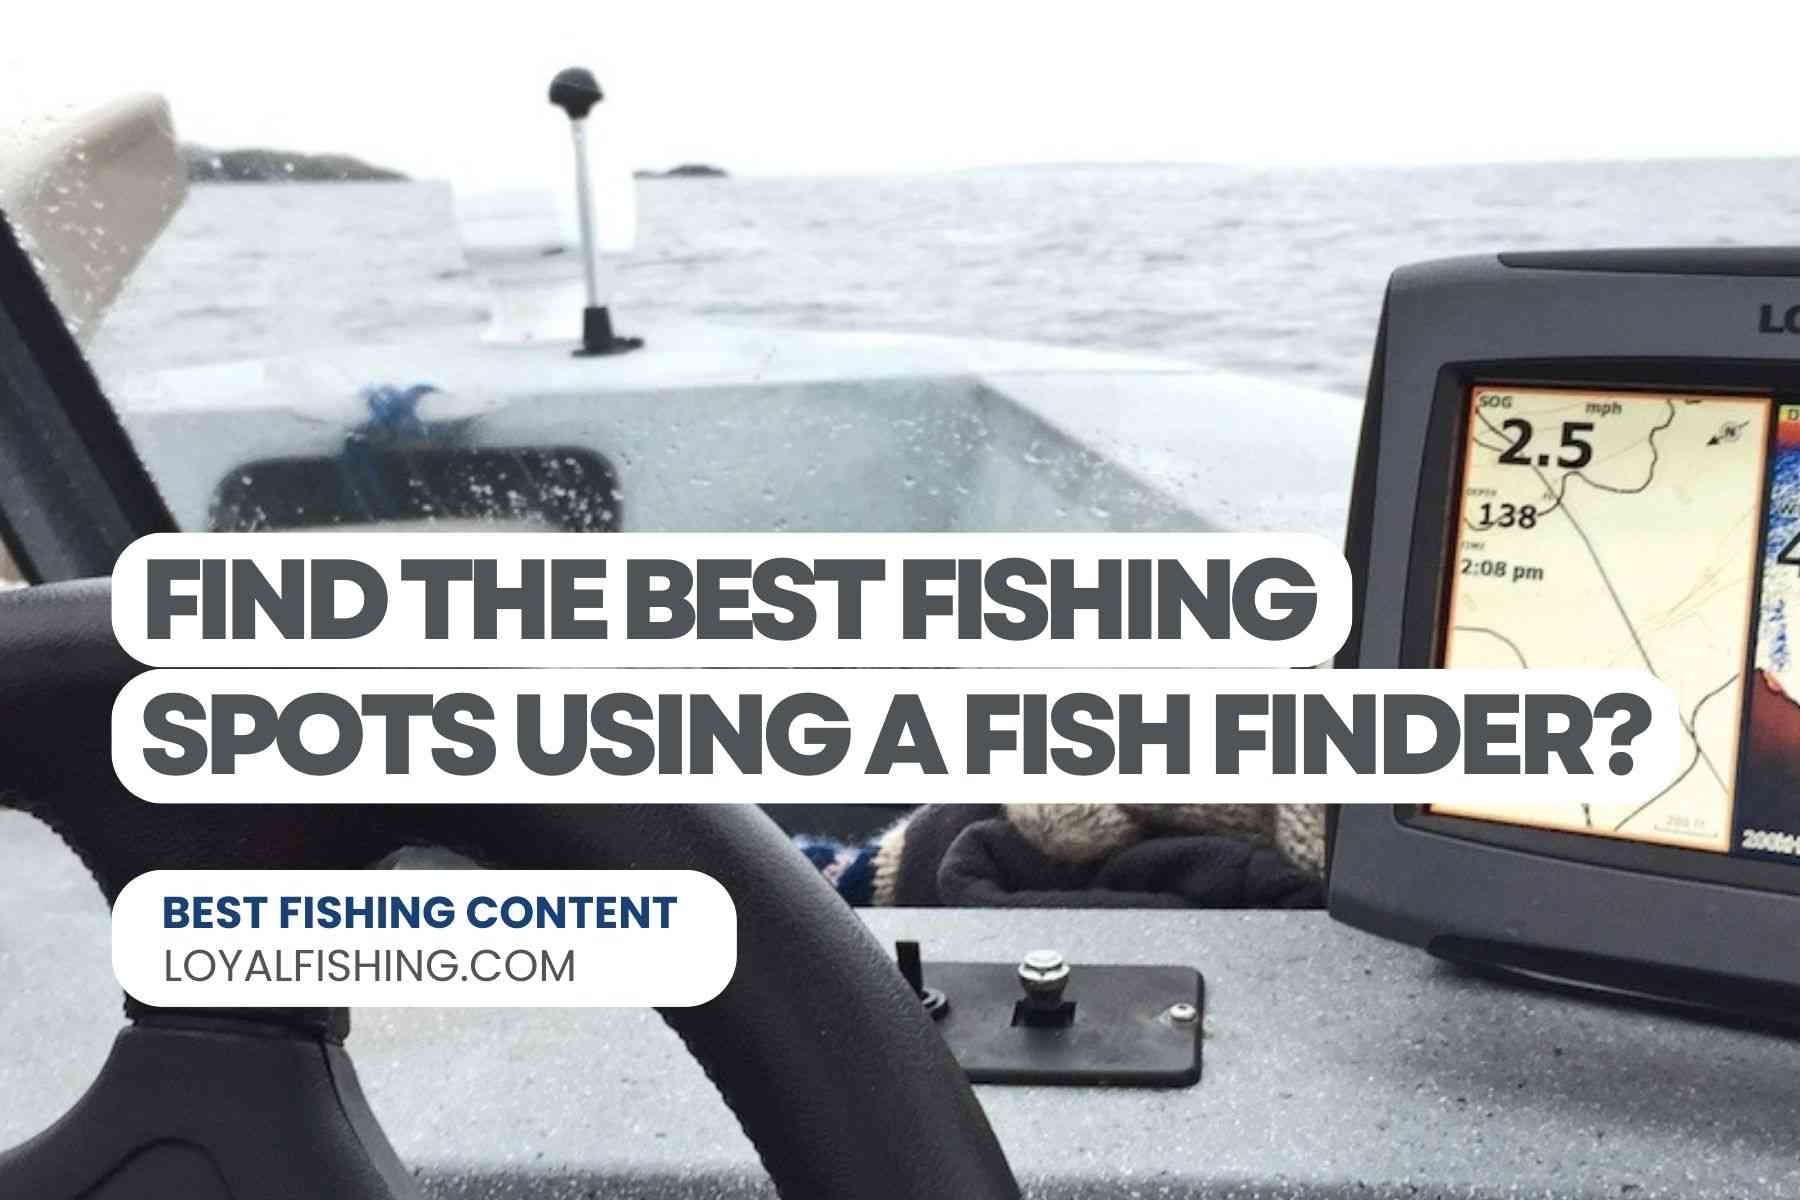 How to Find The Best Fishing Spots Using a Fish Finder